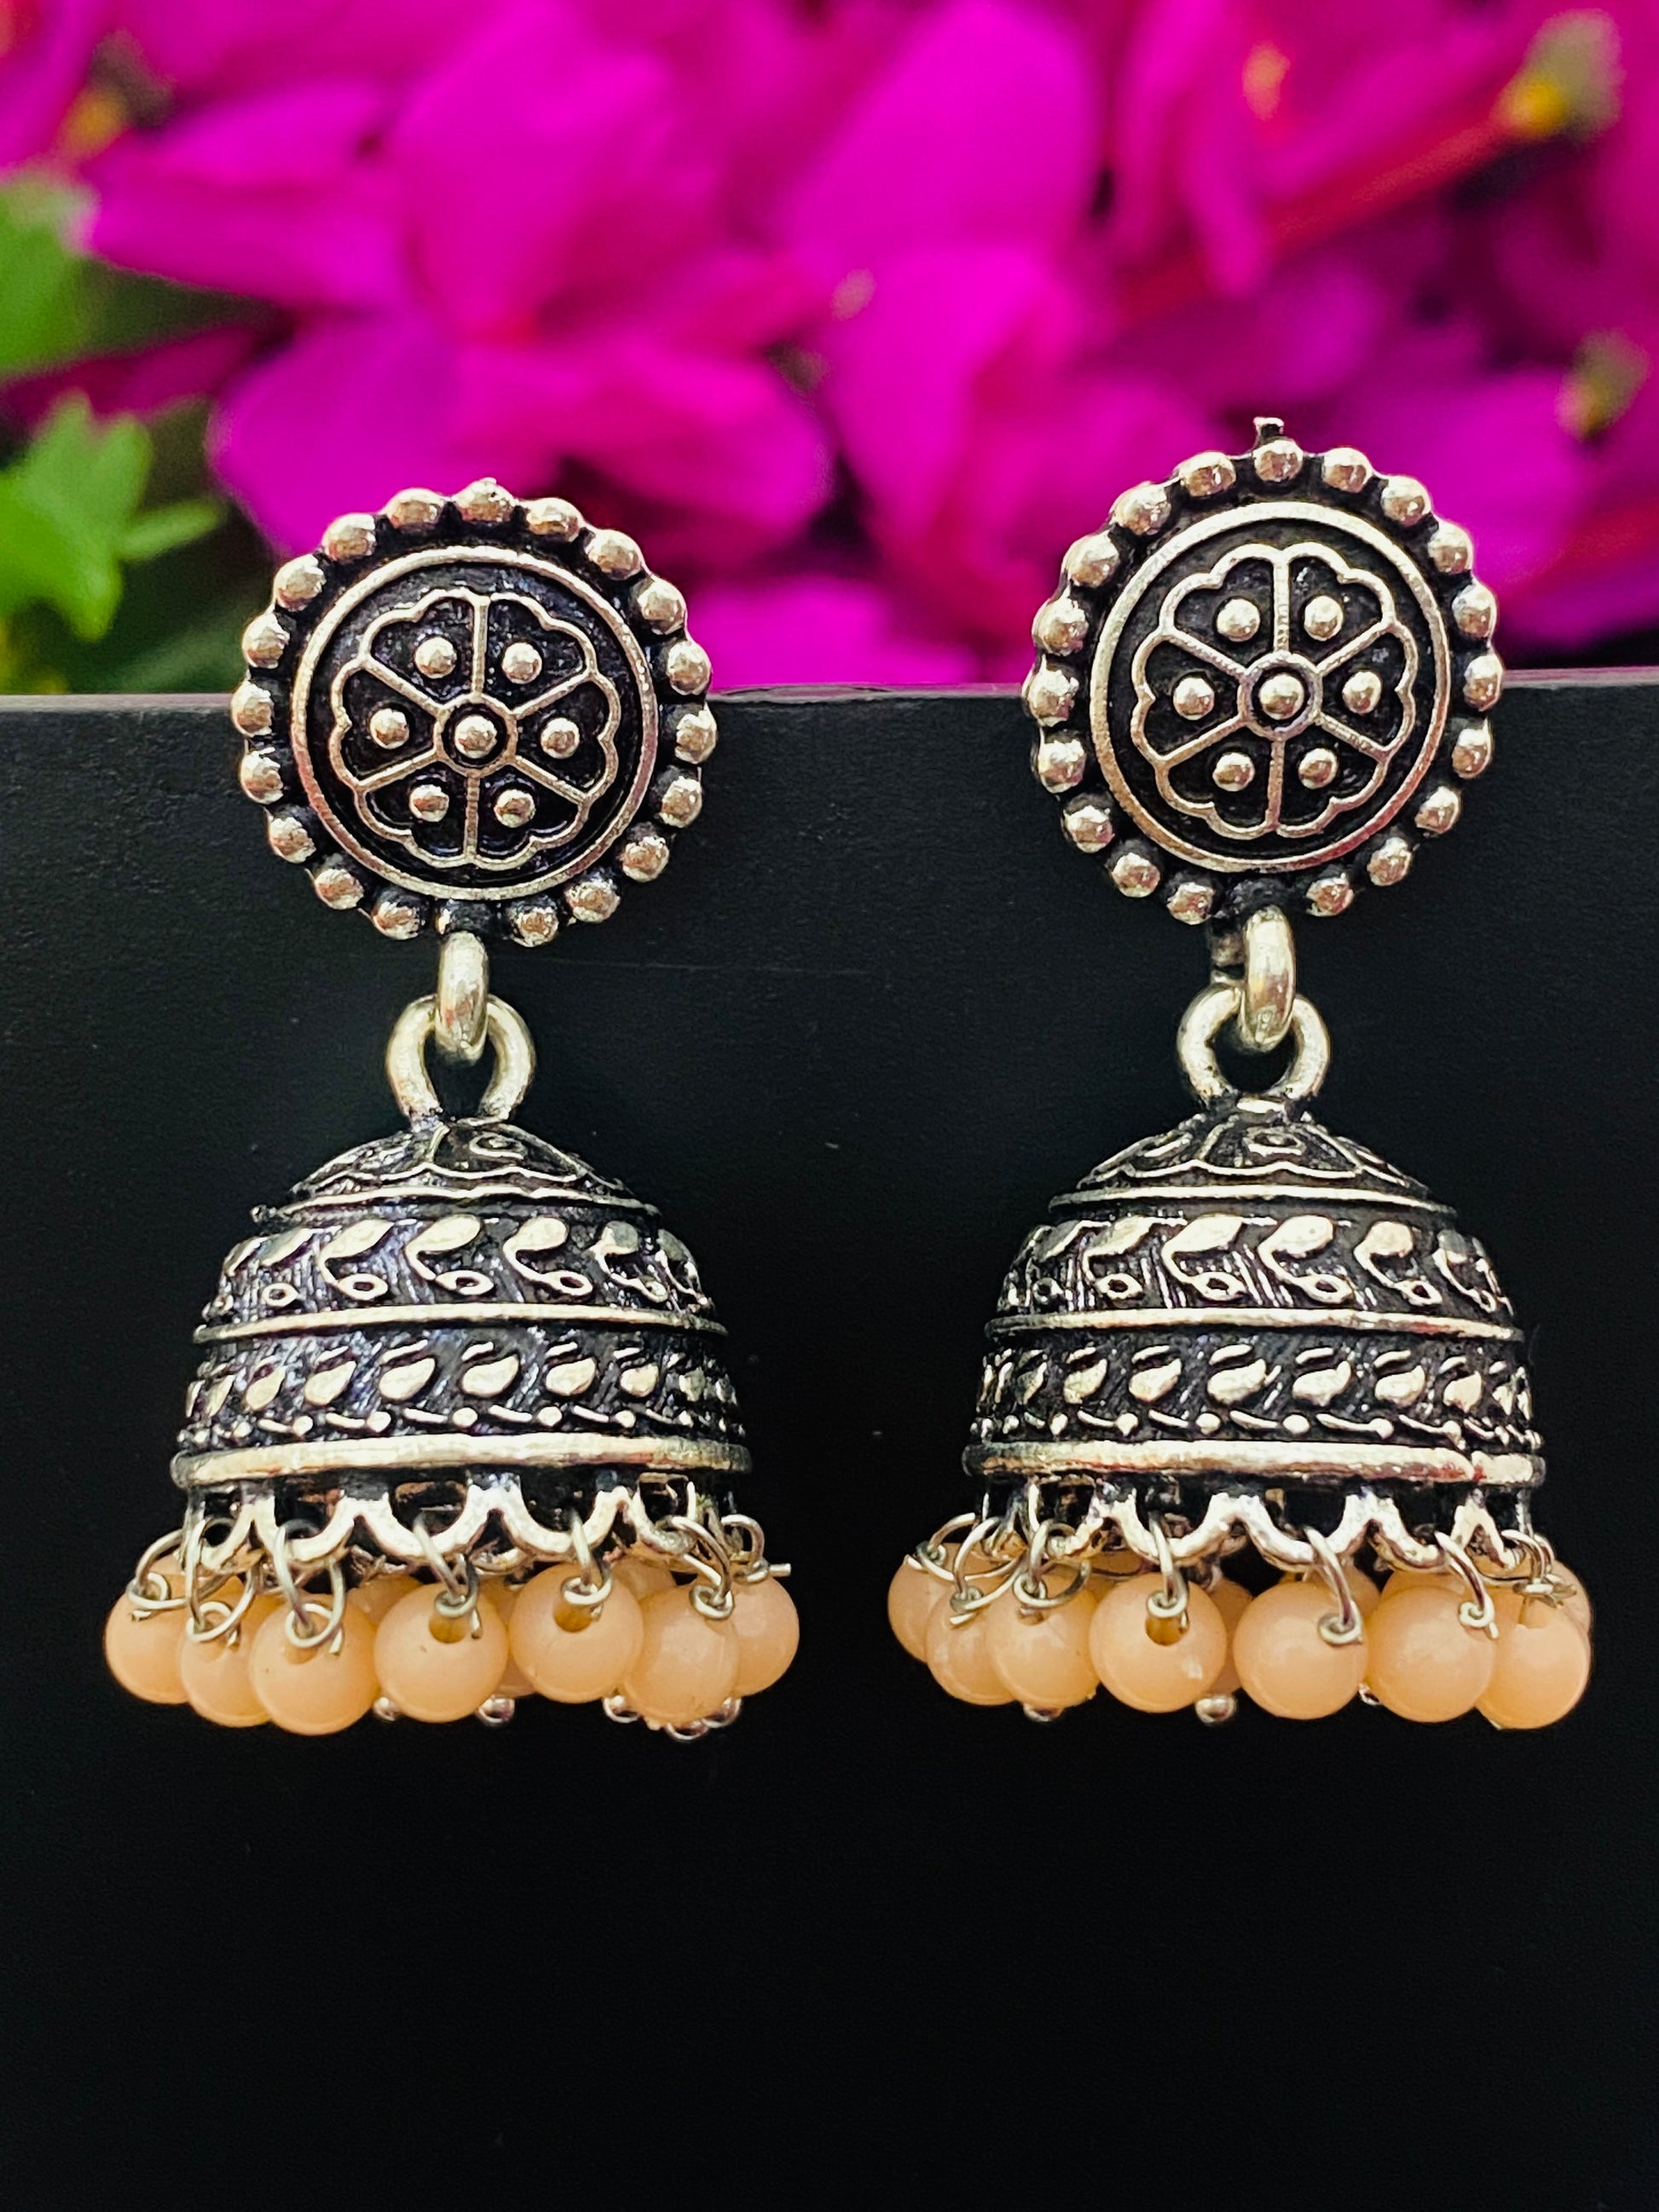  Jhumkas With Peach Color Beads In Chandler